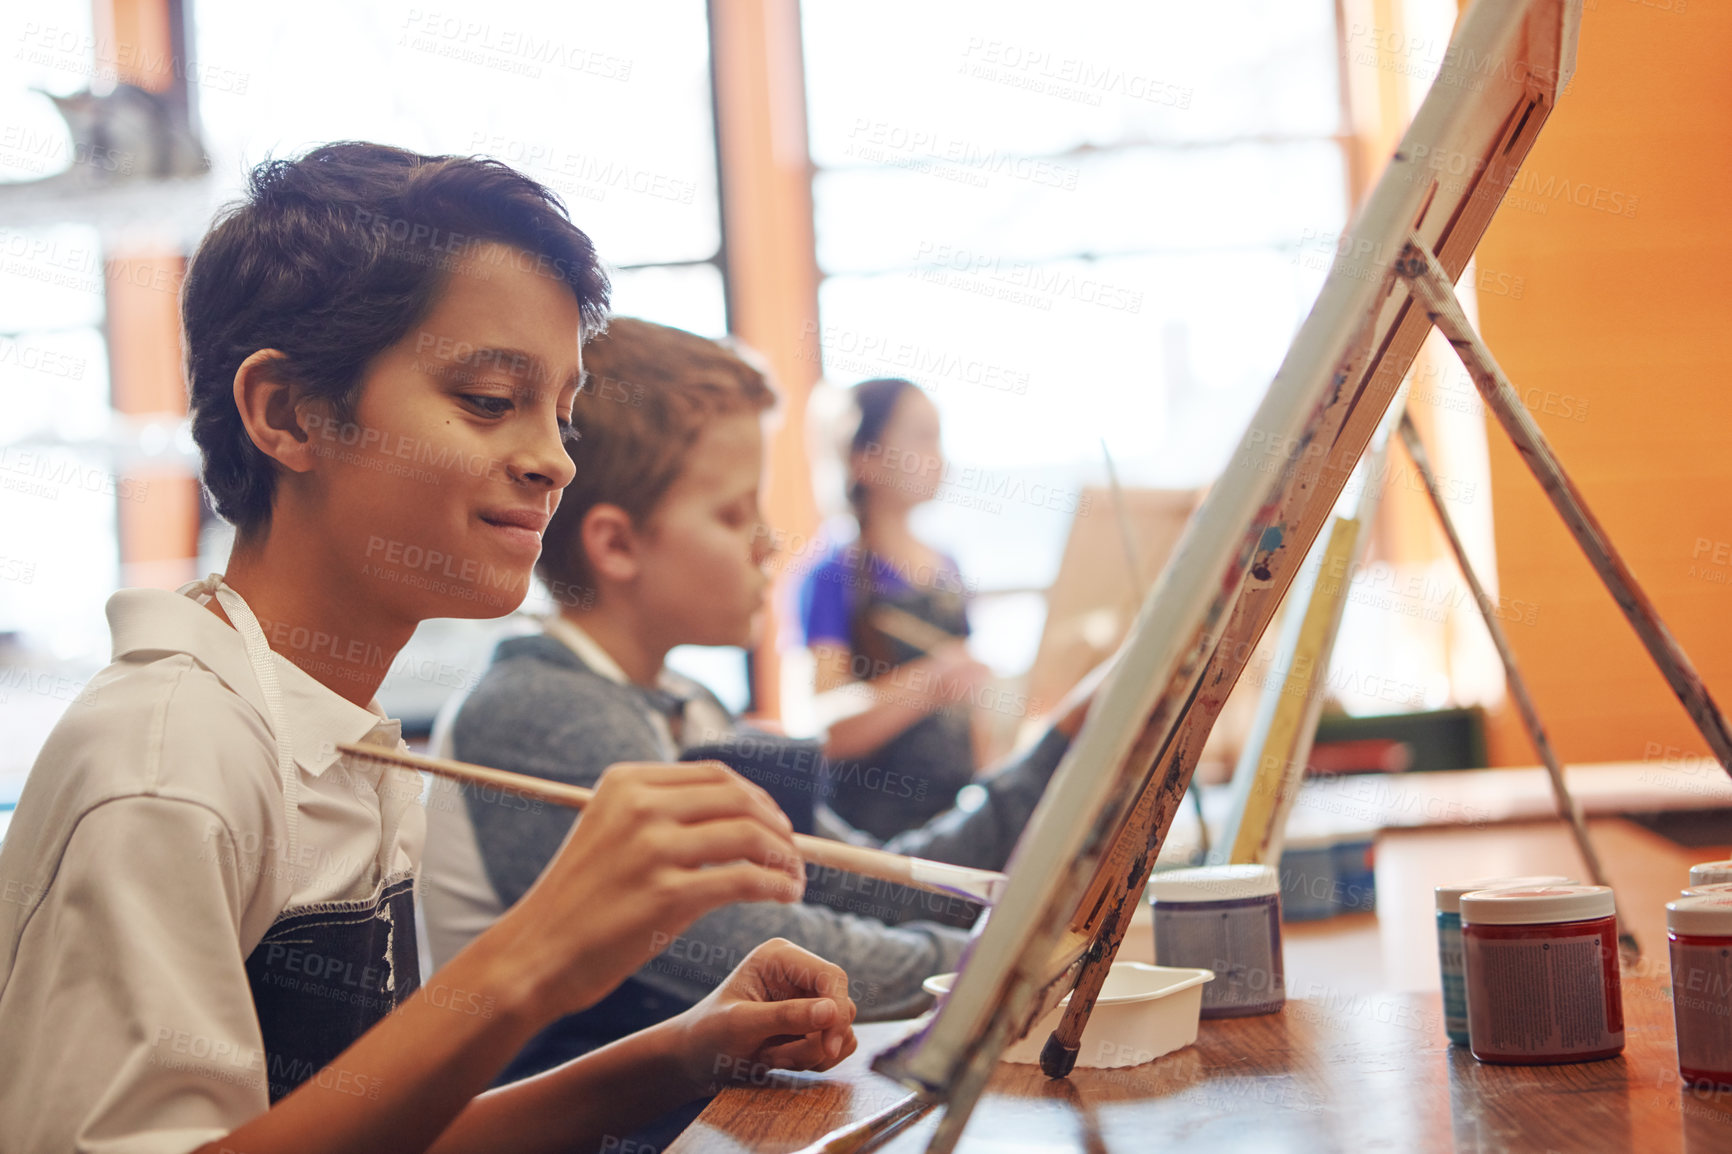 Buy stock photo Shot of a young schoolboy in an art class